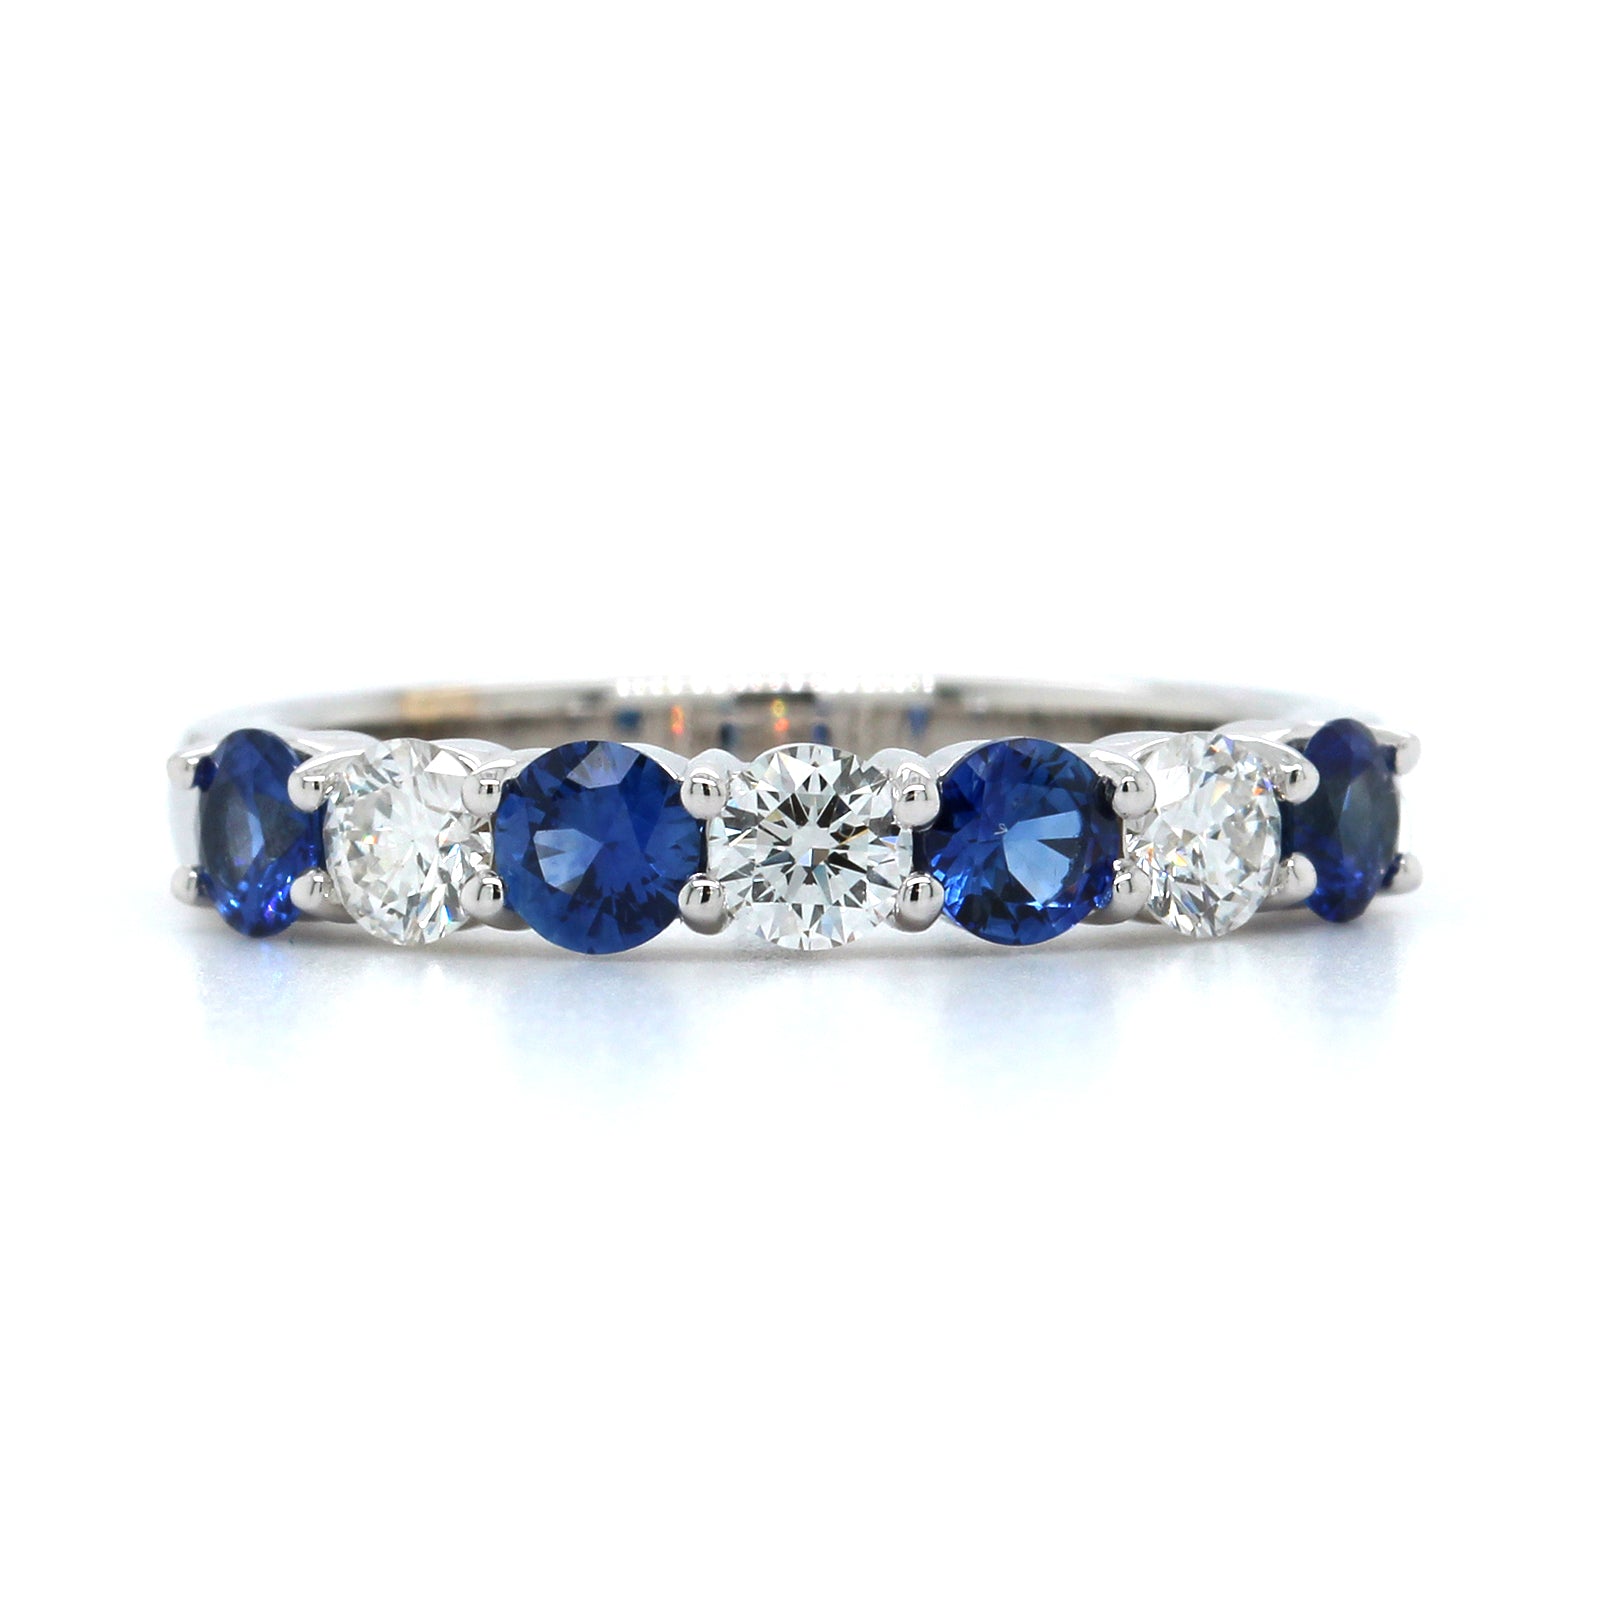 18K White Gold Shared Prong Sapphire and Diamond Band